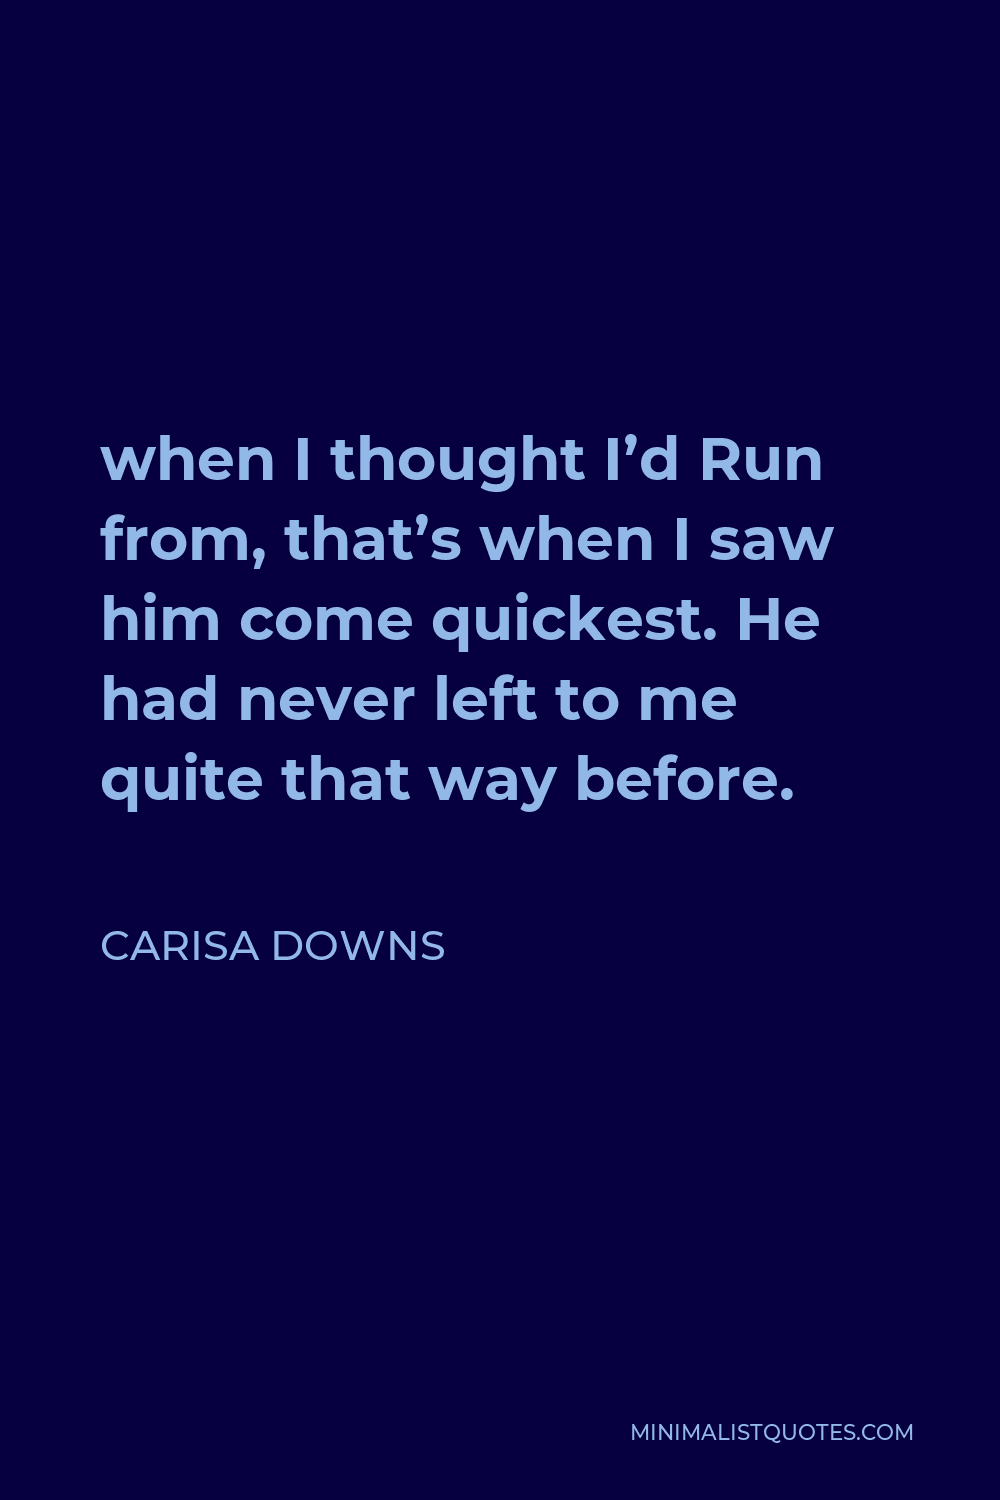 Carisa Downs Quote When I Thought I D Run From That S When I Saw Him Come Quickest He Had Never Left To Me Quite That Way Before